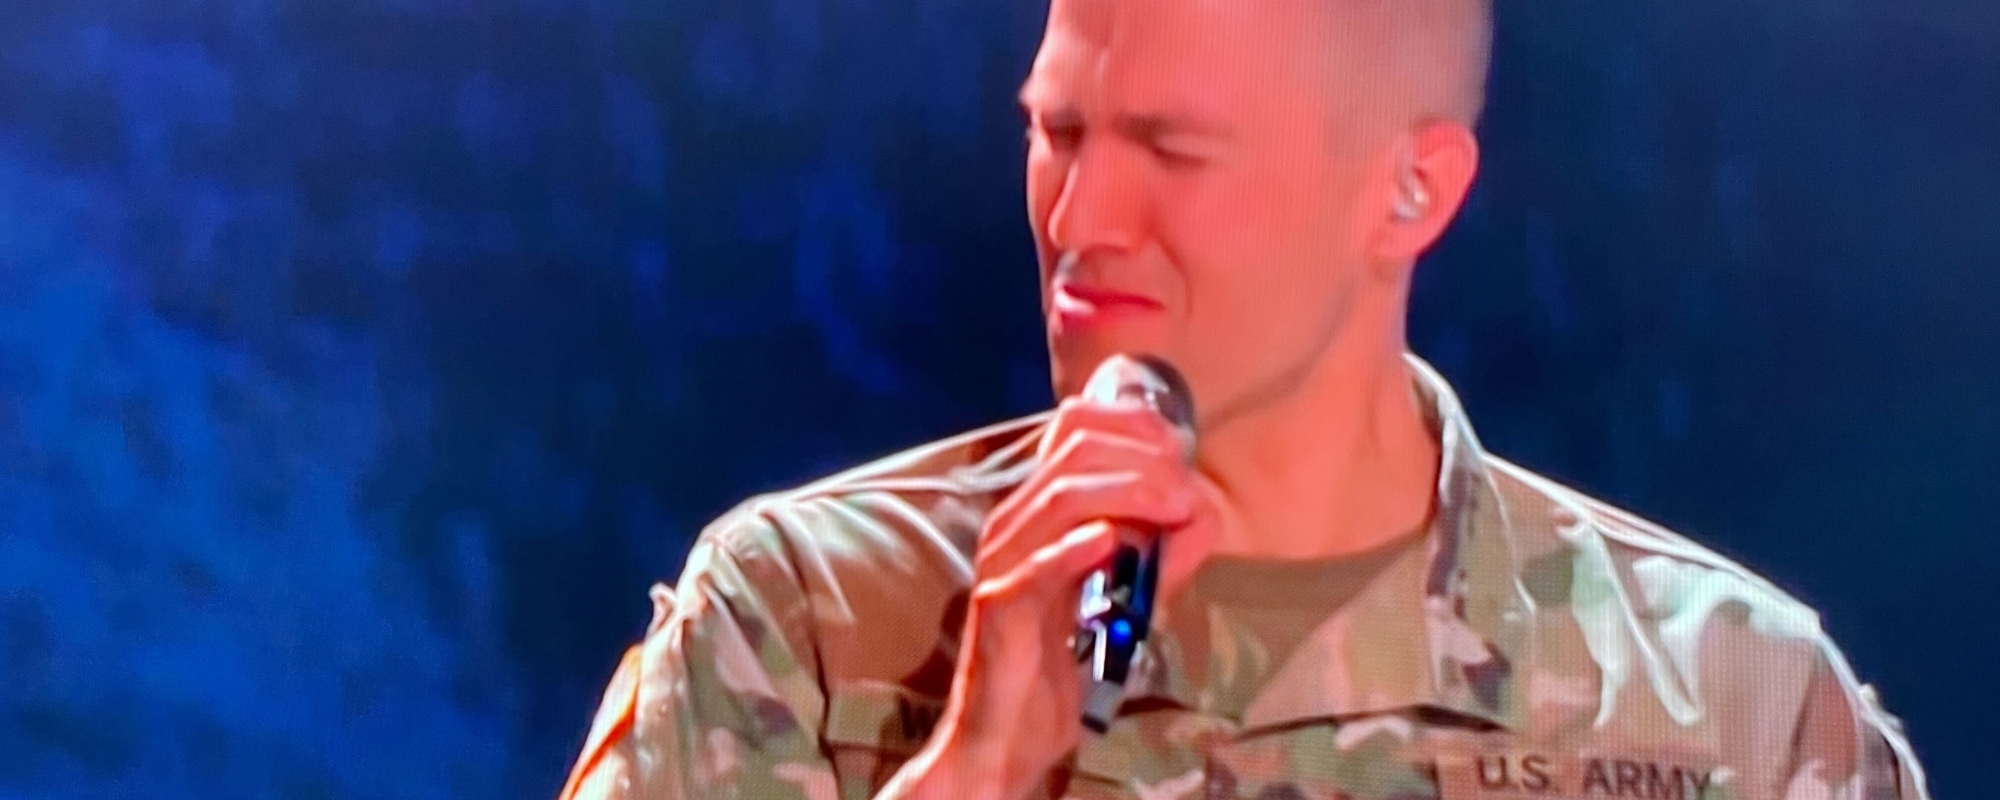 ‘The Voice’ Fans Salute U.S. Army Field Band’s Incredible Gavin DeGraw Performance